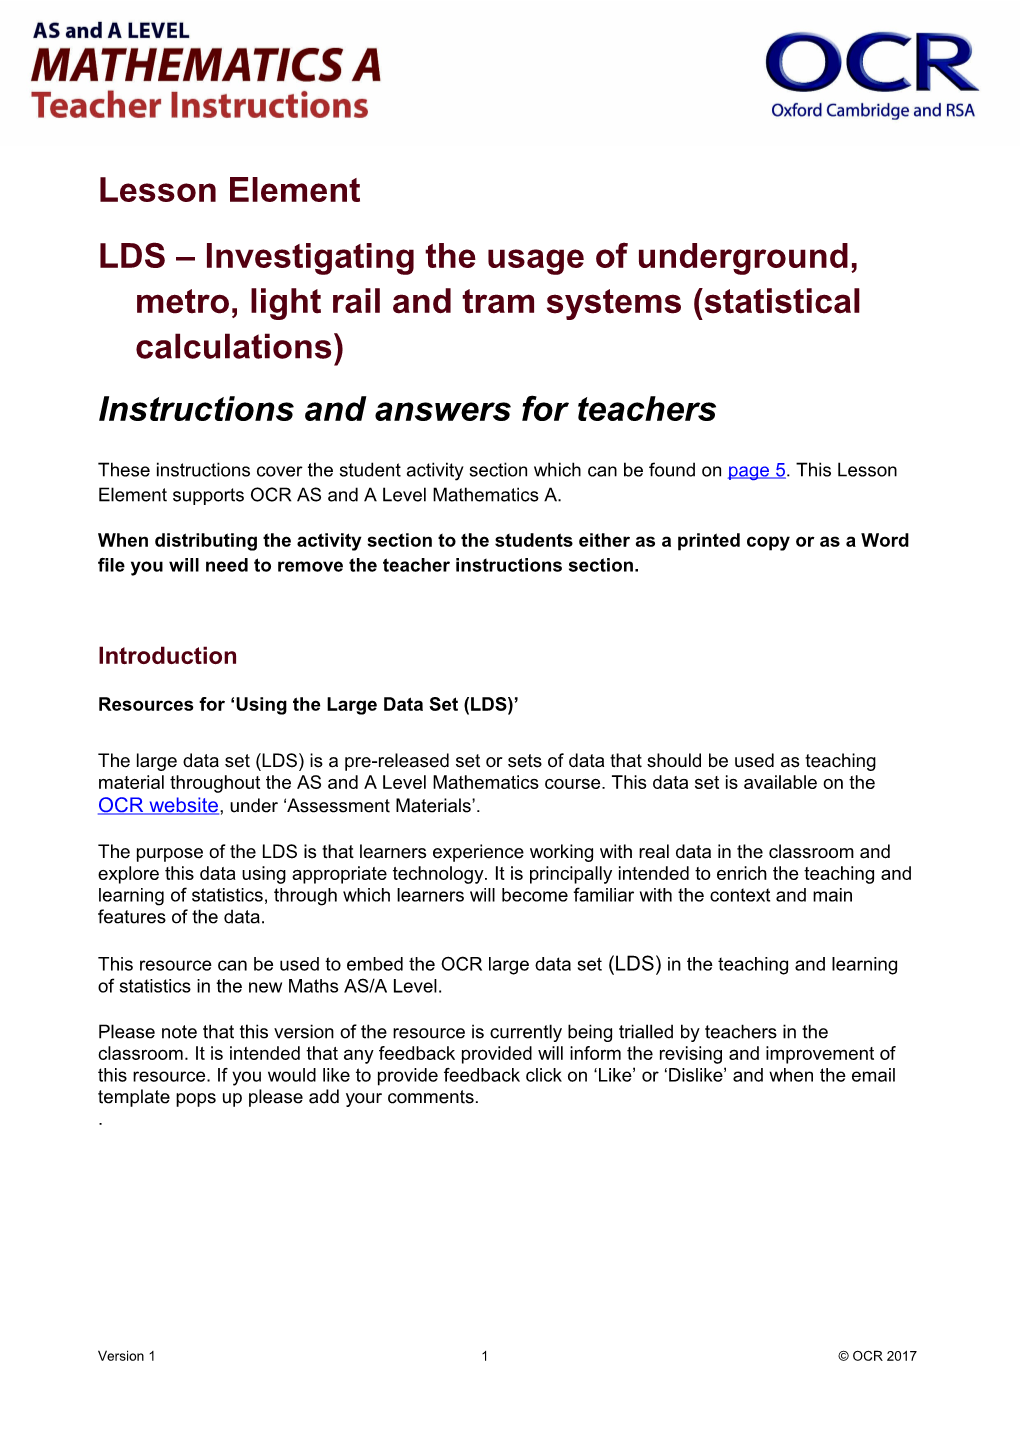 OCR AS and a Level Mathematics a Lesson Element - LDS Investigating the Usage of Underground